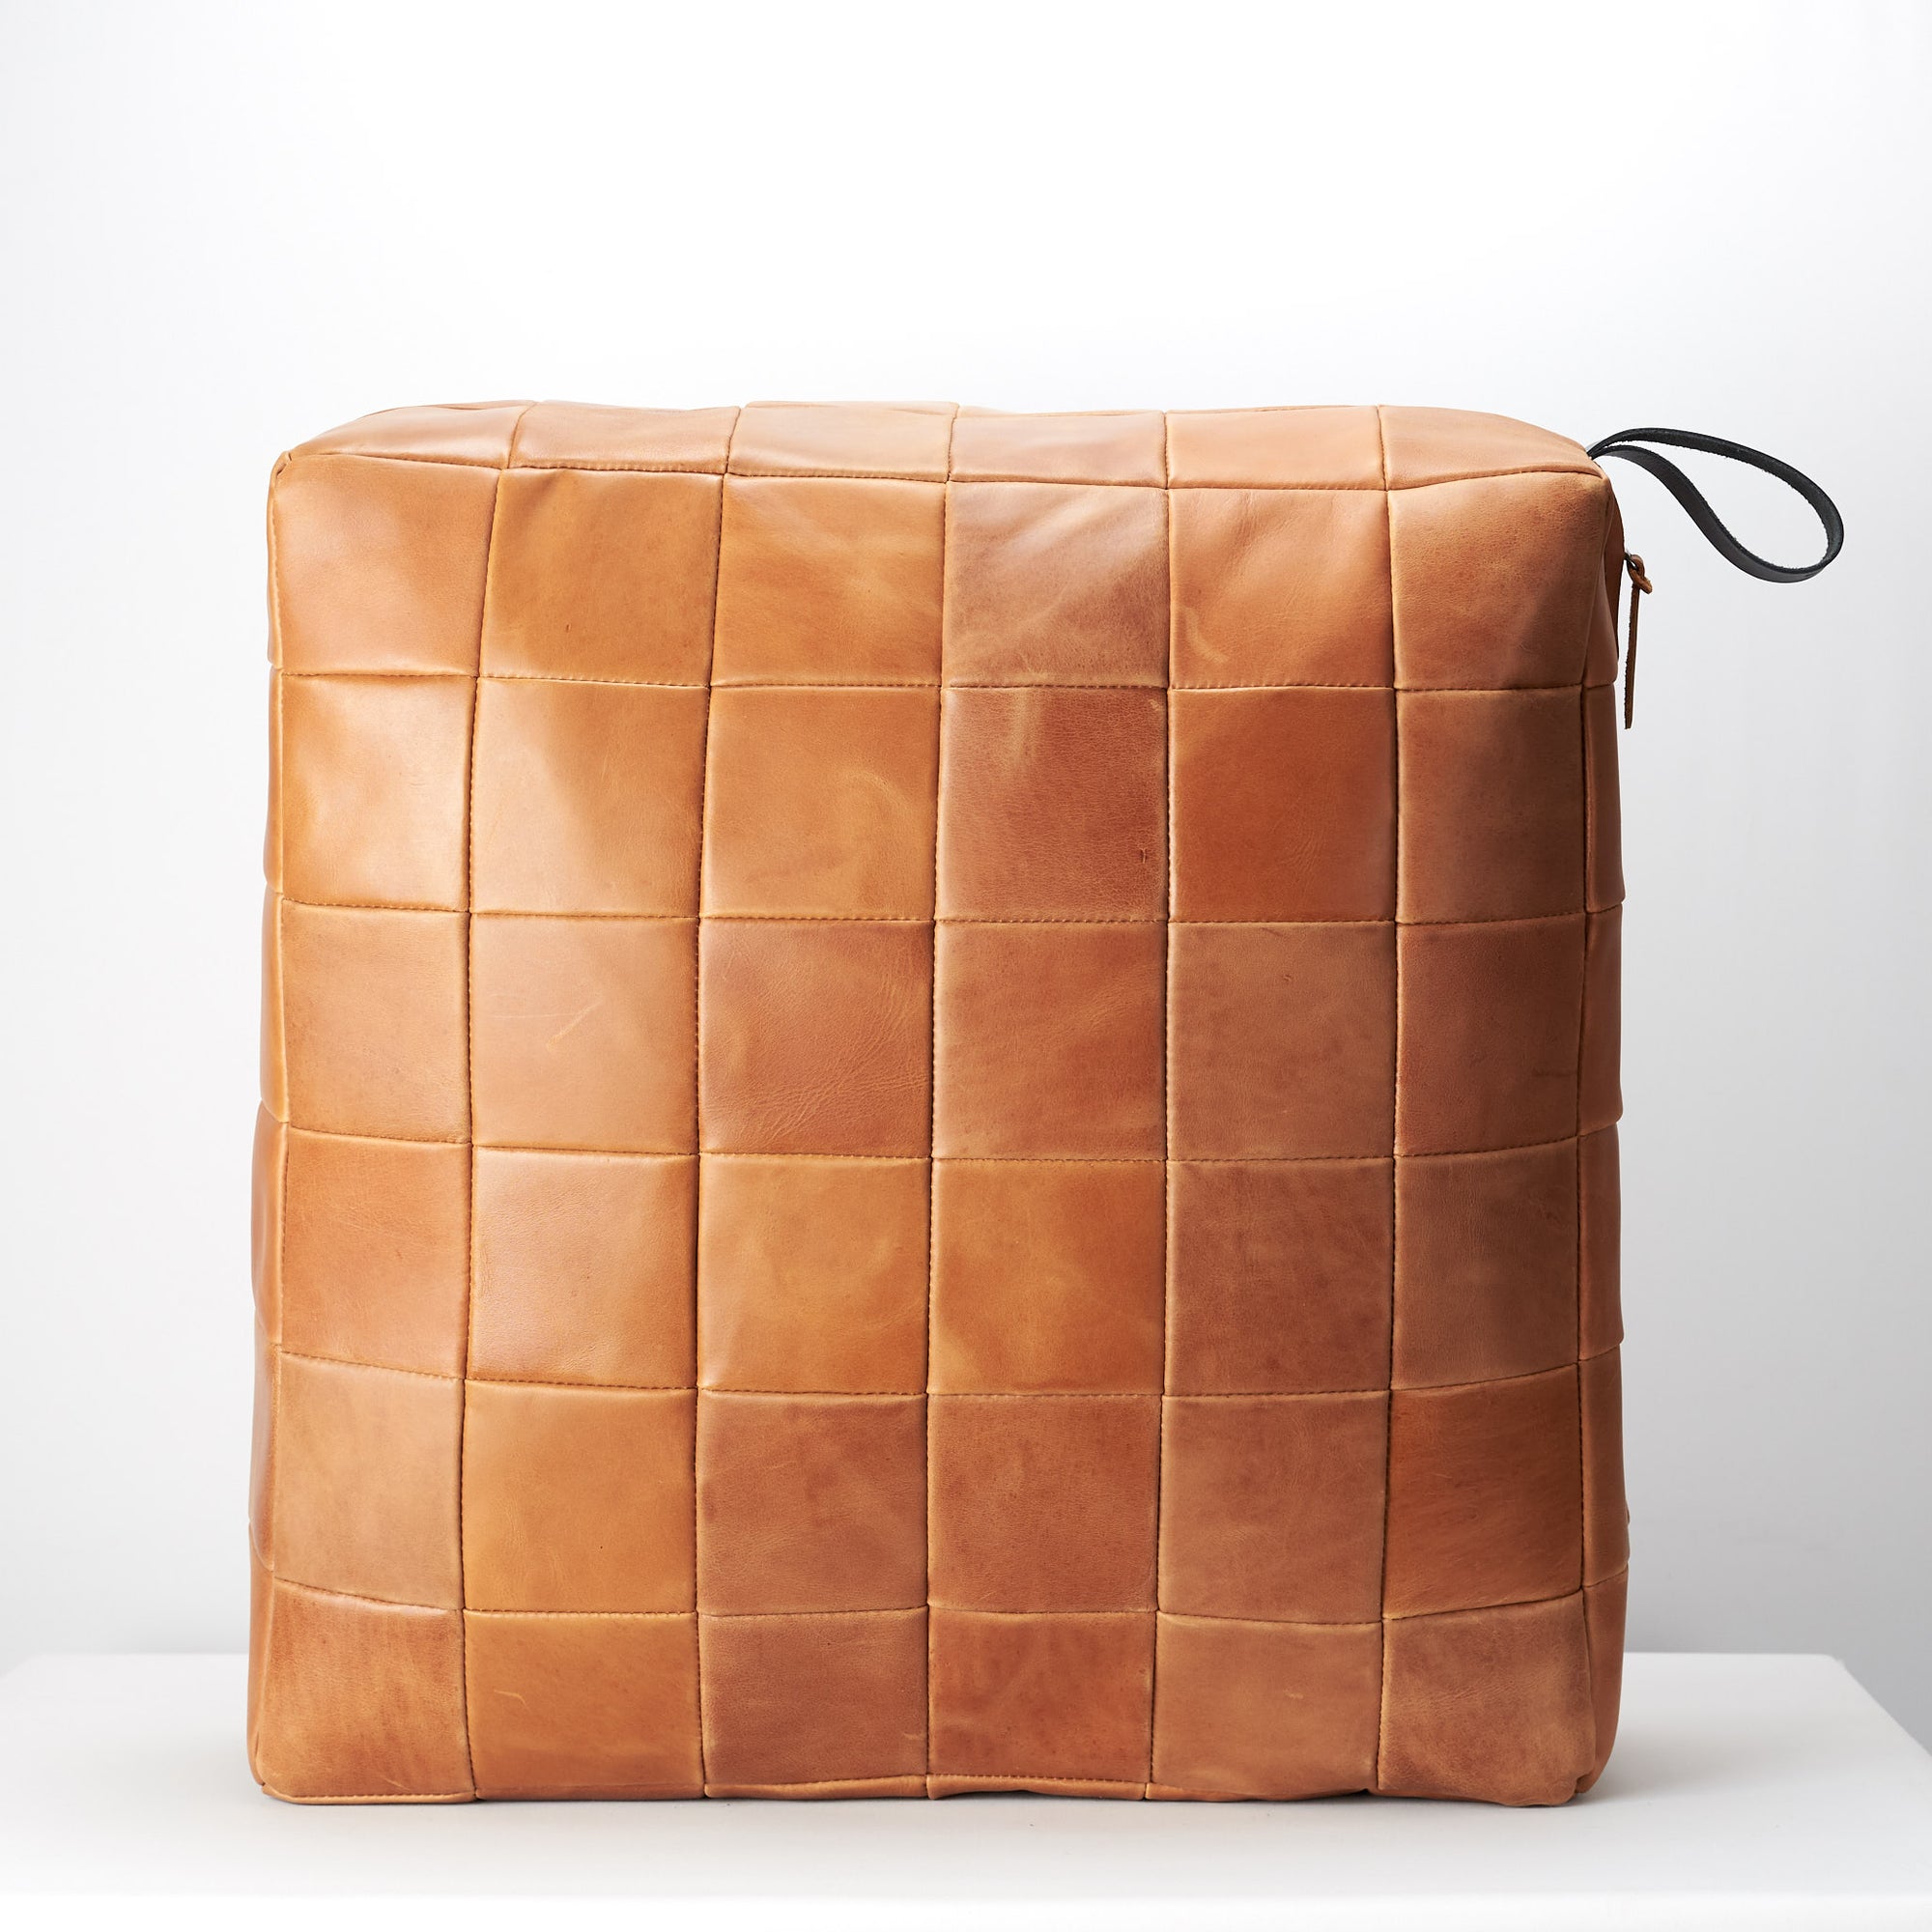 Tan Leather floor cushion pillow stand up. Ottoman personalized size.